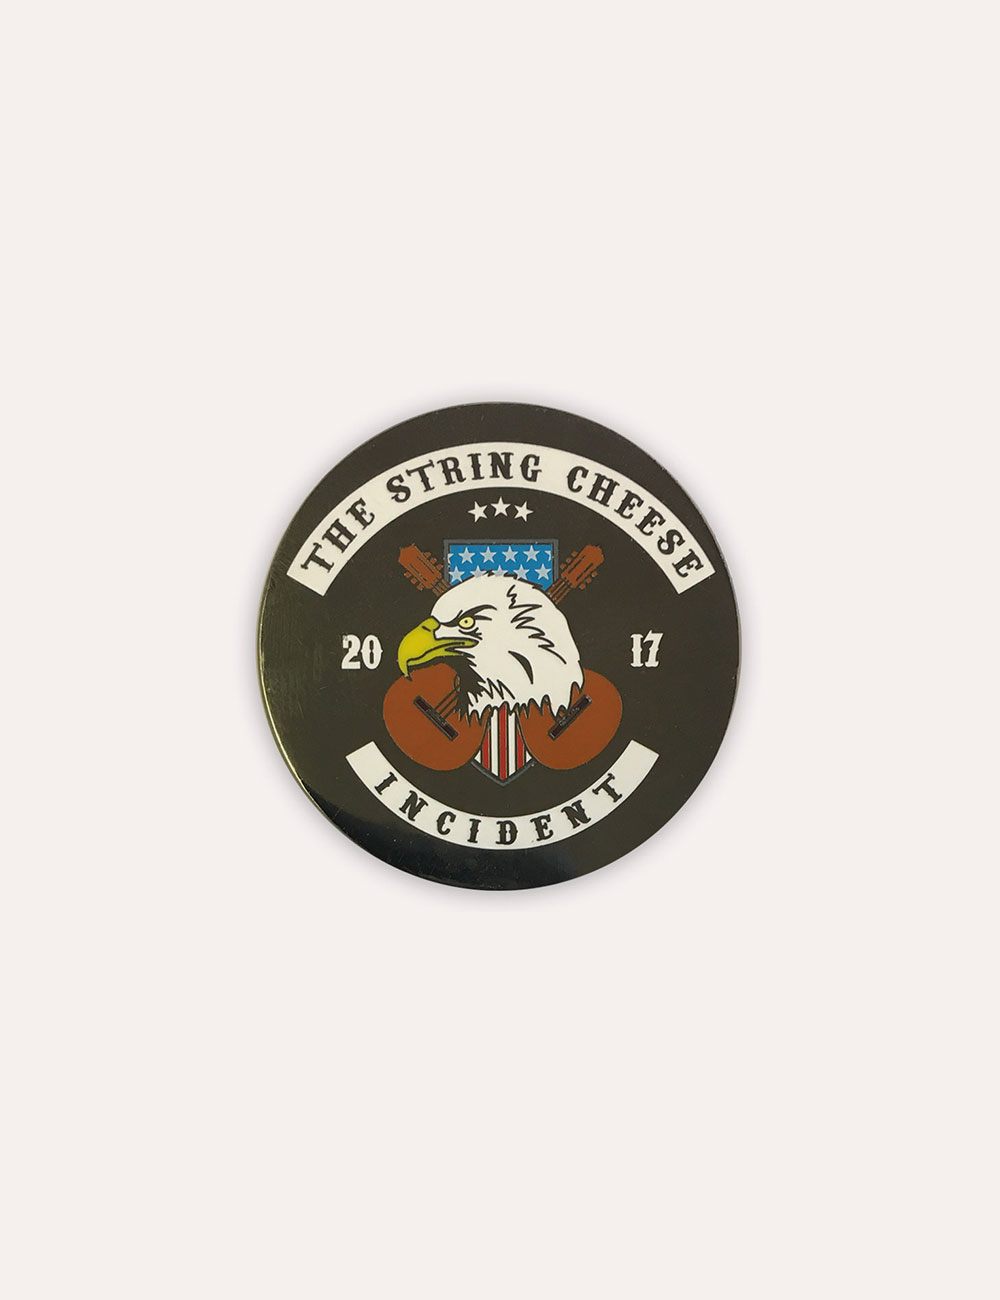 The String Cheese Incident - Merch - Extra Cheese - 2017 Eagle Pin